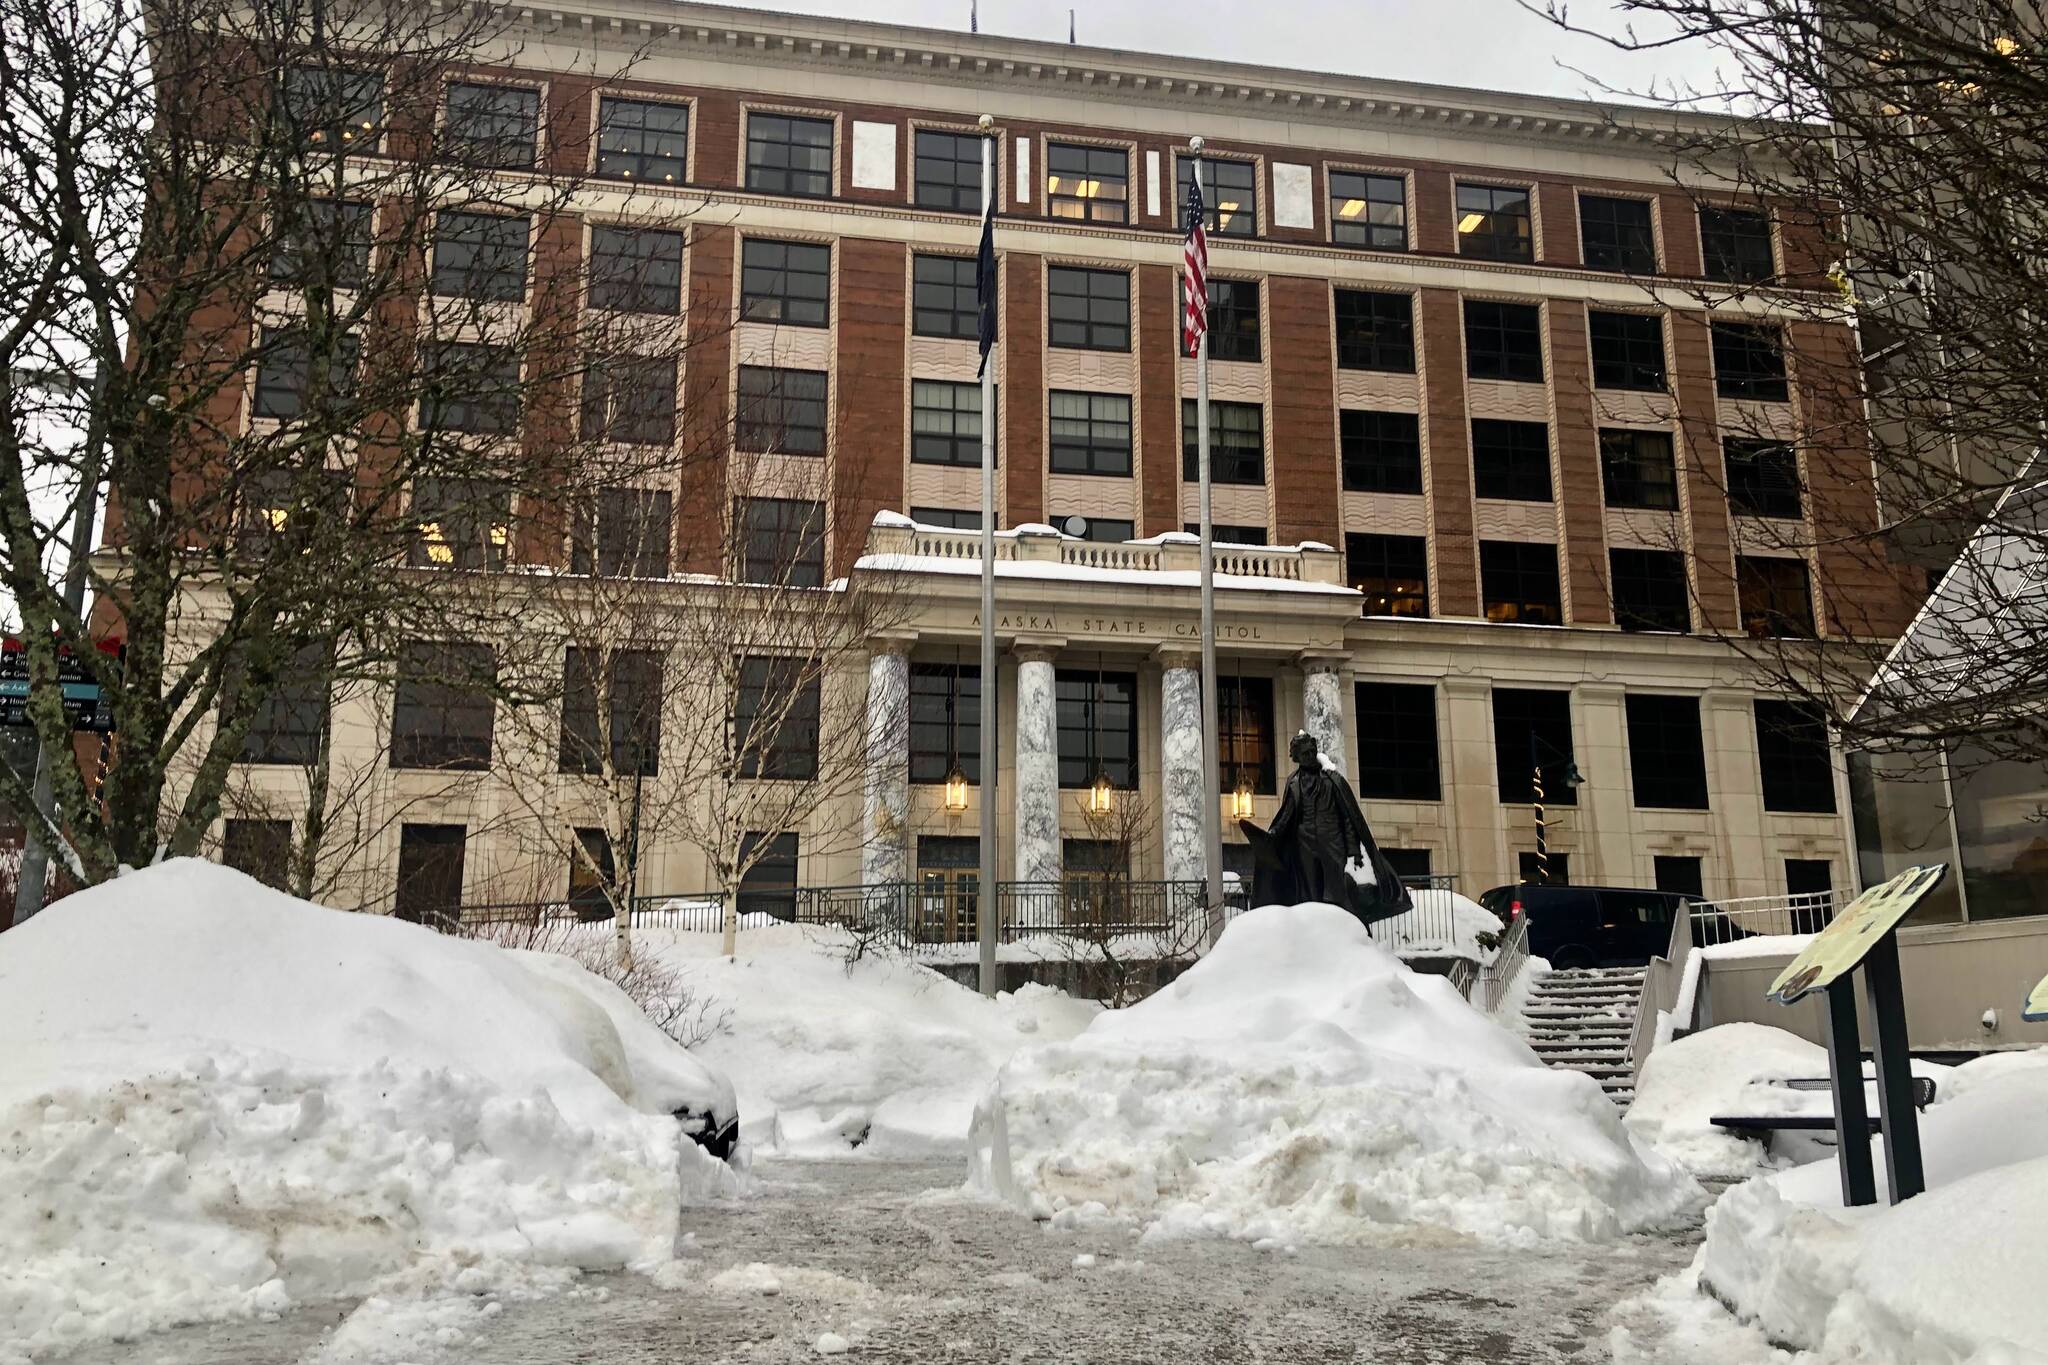 Lawmakers will return next week to the Alaska State Capitol building, seen here on Monday, Jan. 10, 2022, for the next session of the Alaska State Legislature. (Peter Segall / Juneau Empire)